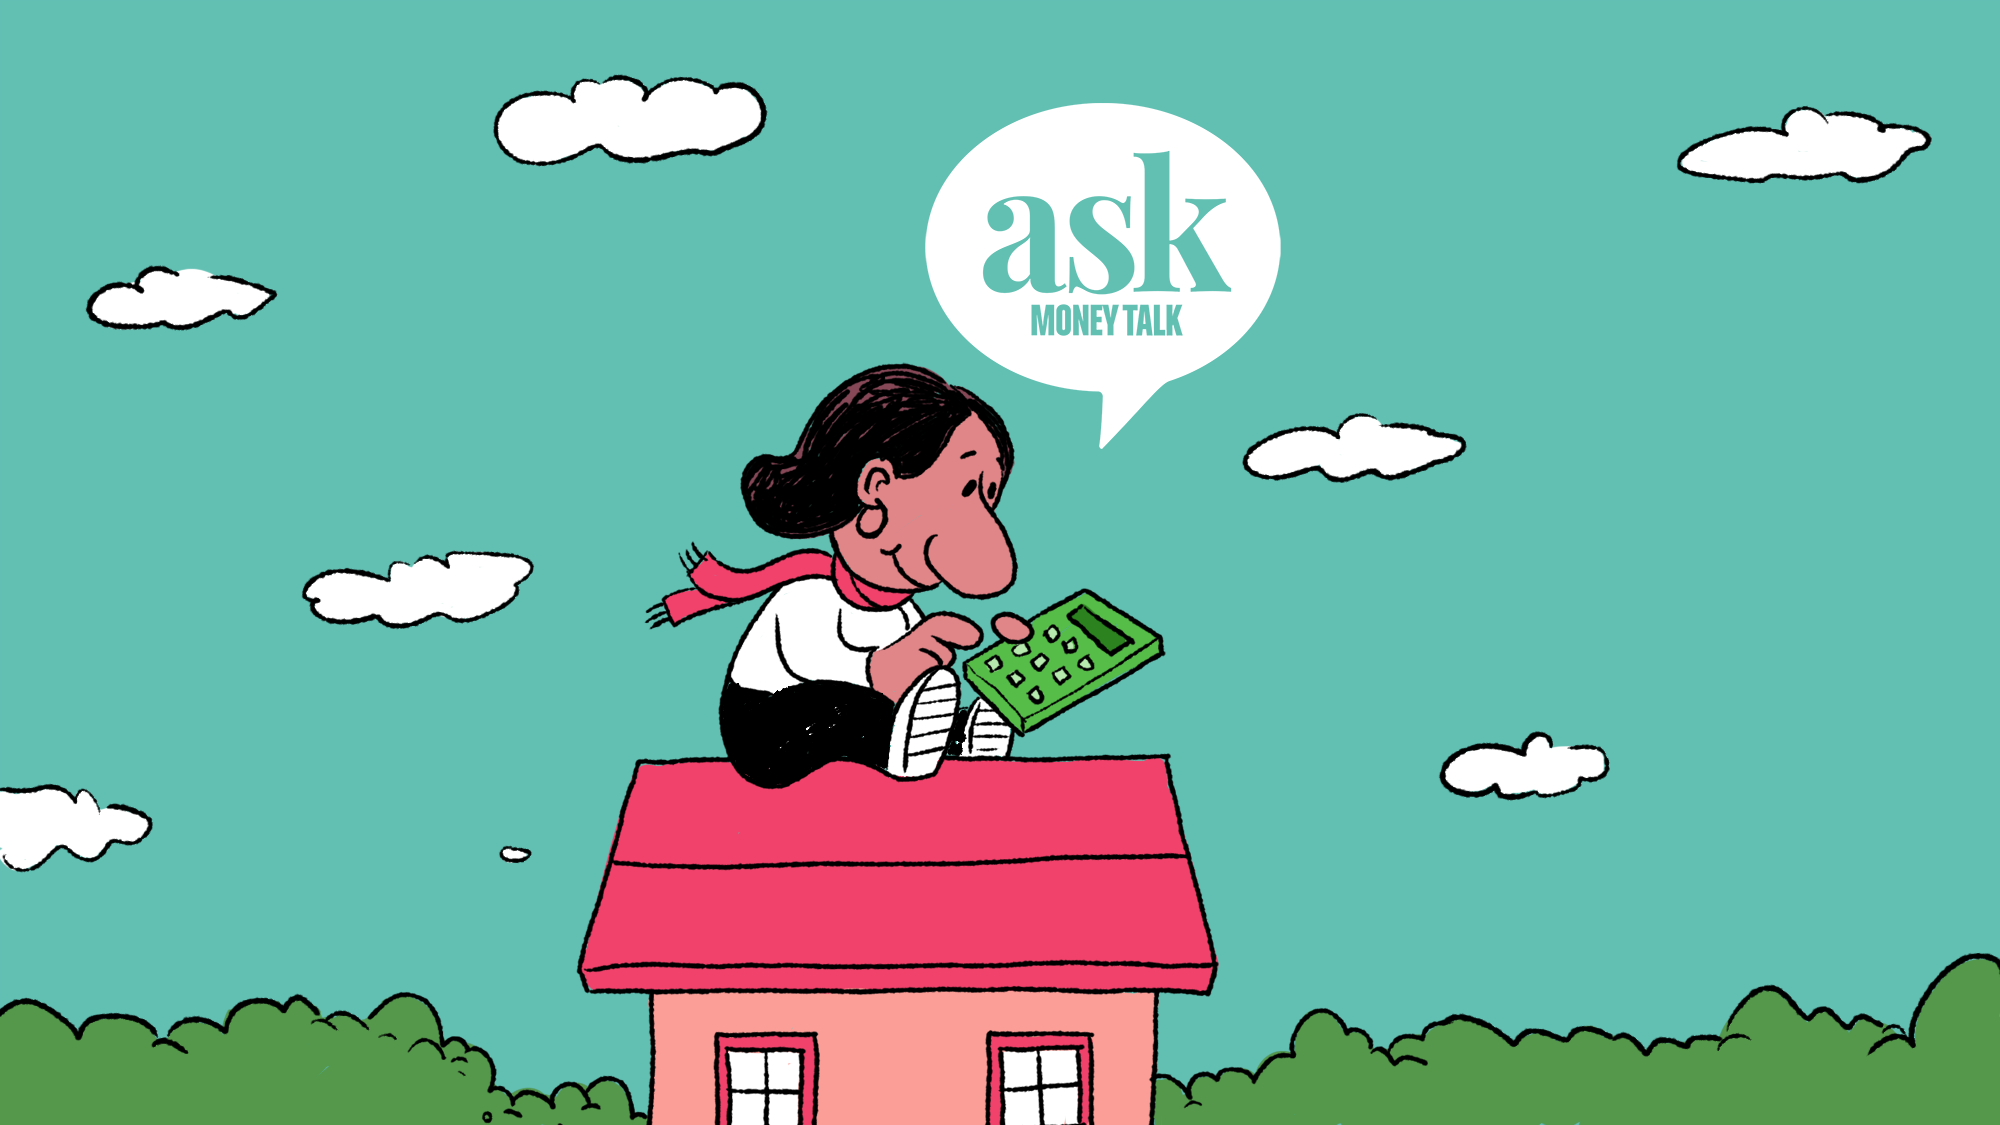 Illustration of a girl with a calculator sitting on top of house, with ask moneytalk logo